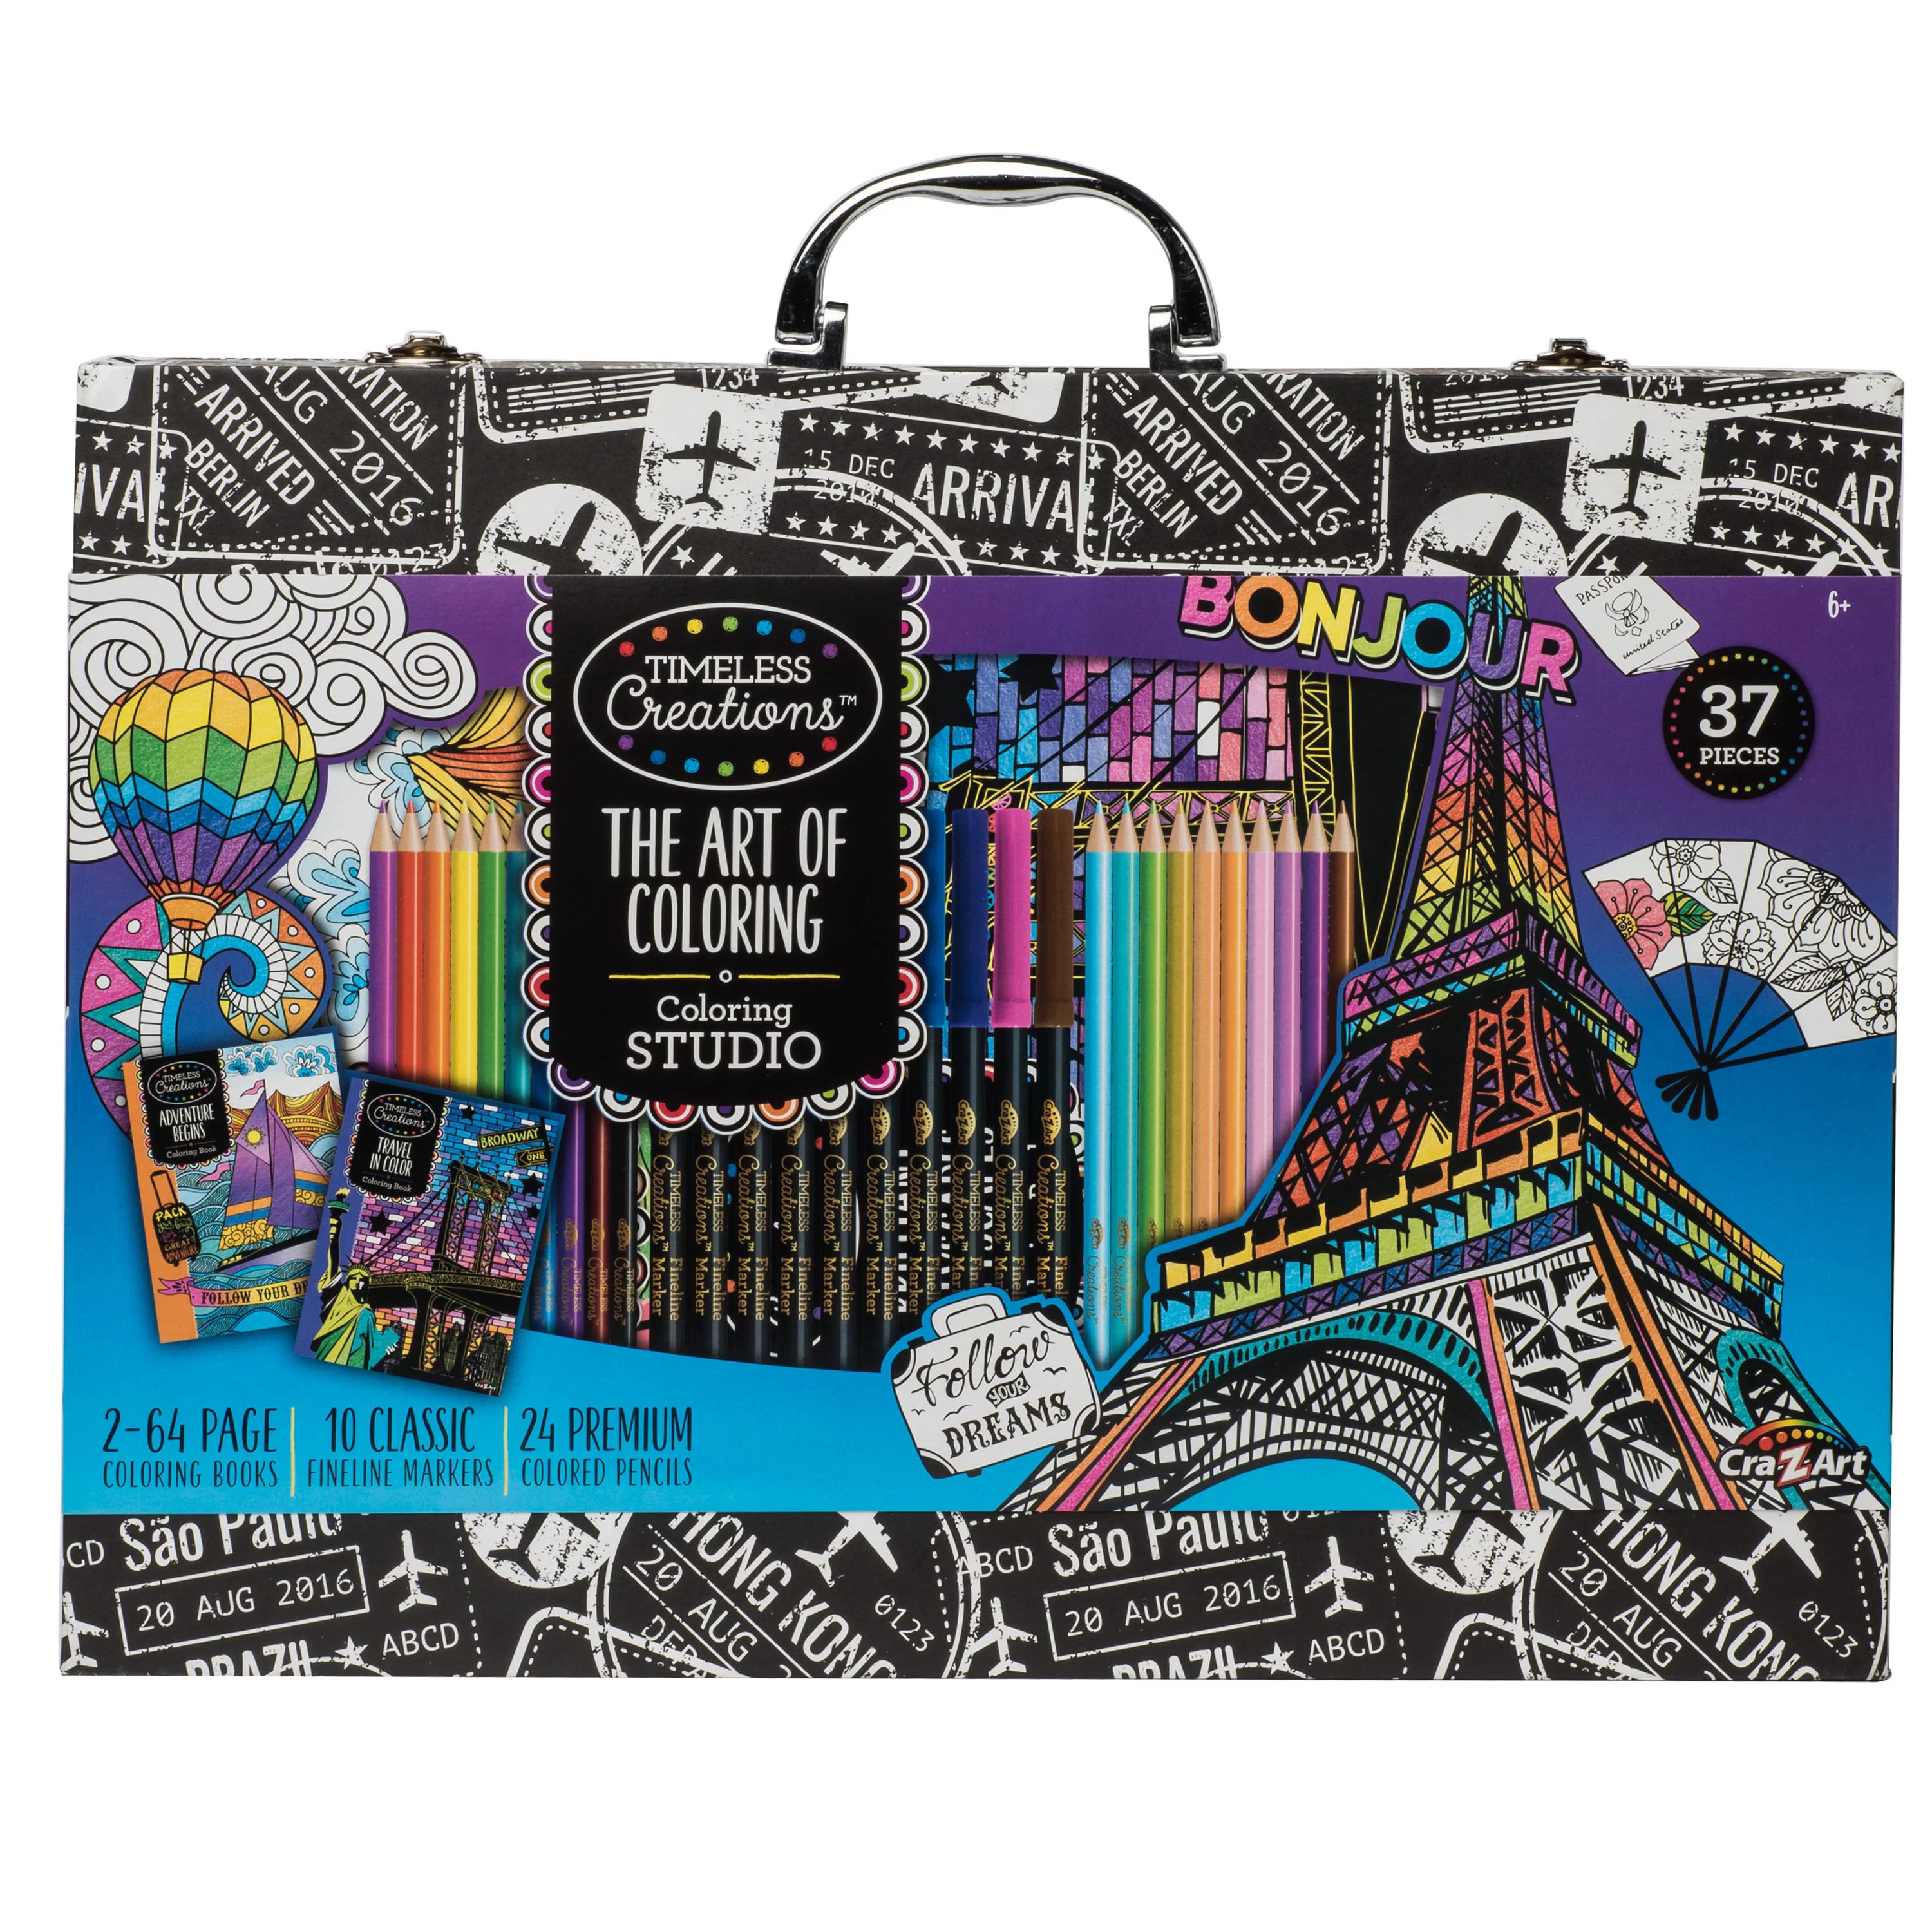 Cra-Z-Art Timeless Creations Multicolor Adult Coloring Drawing Set, Beginner to Expert